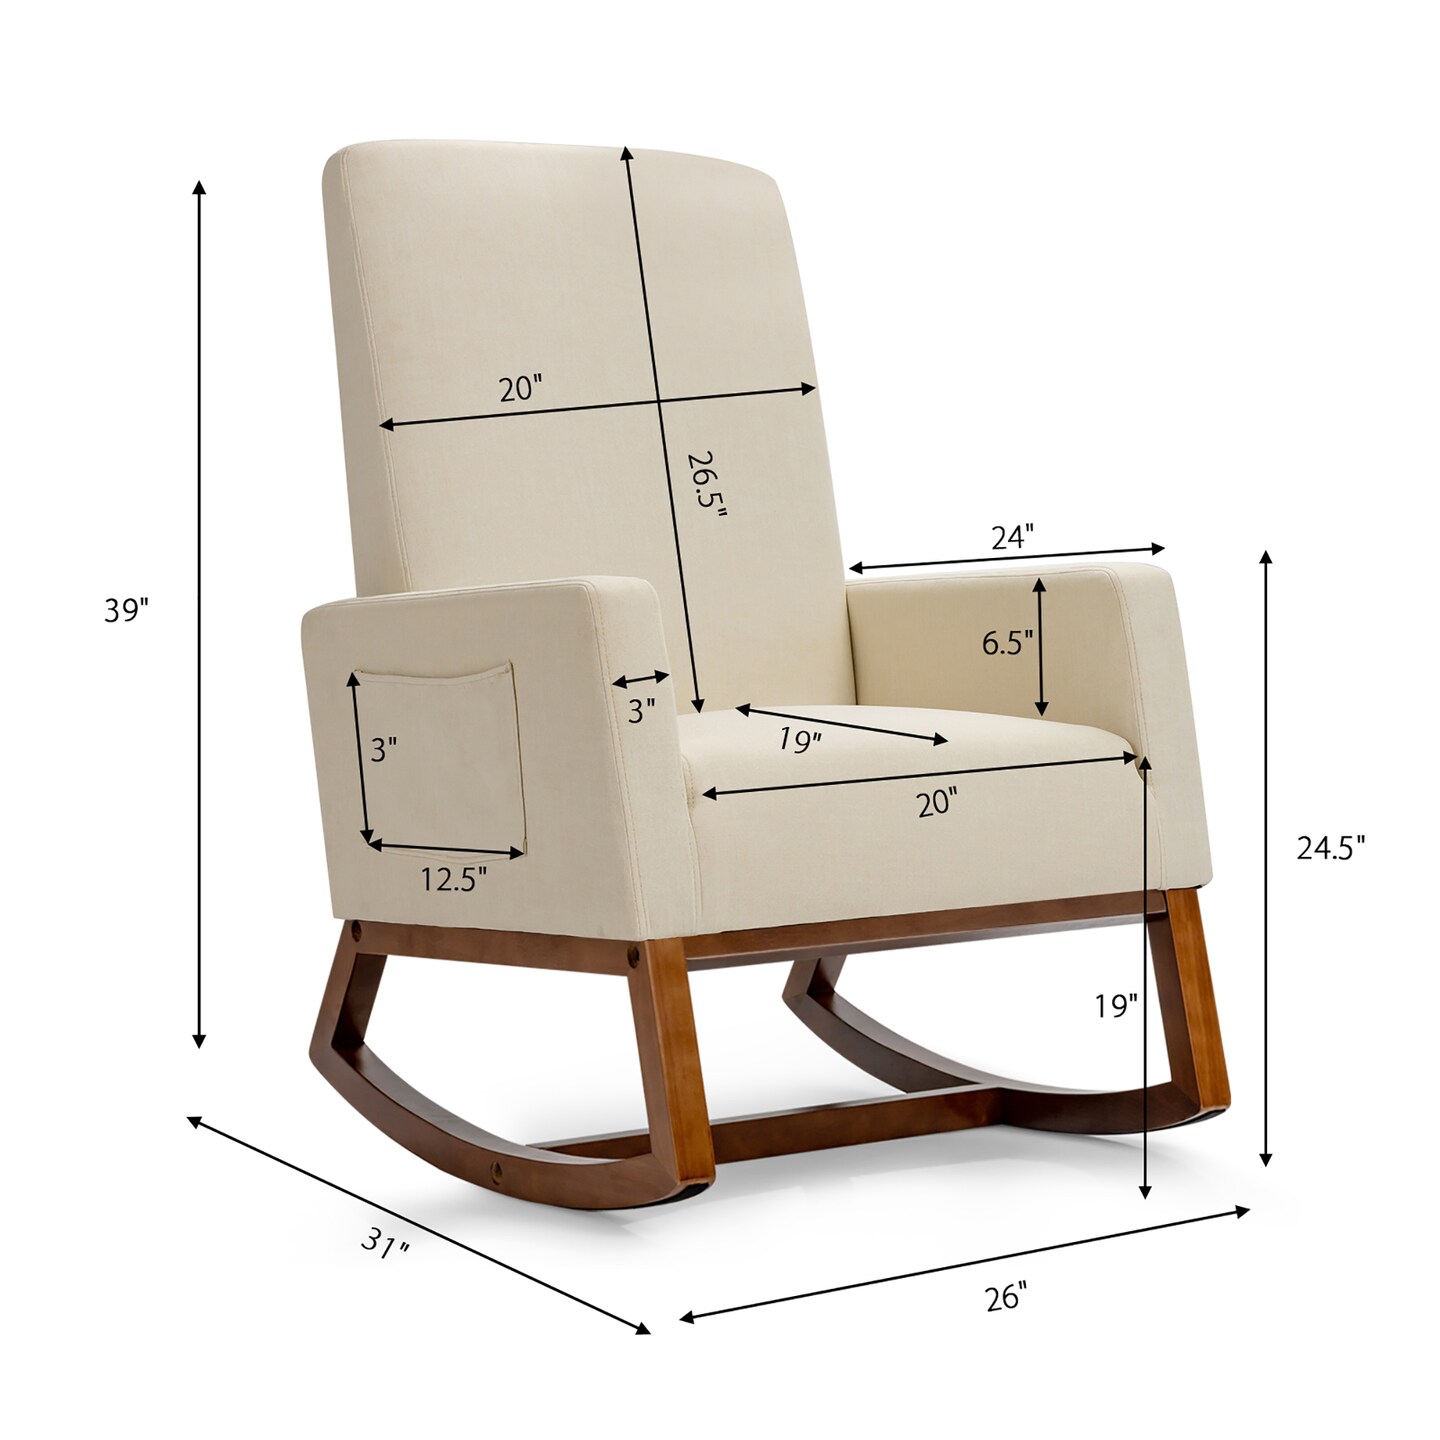 Costway Mid Century Retro Fabric Upholstered  Rocking Chair Modern Armchair Beige\Gray